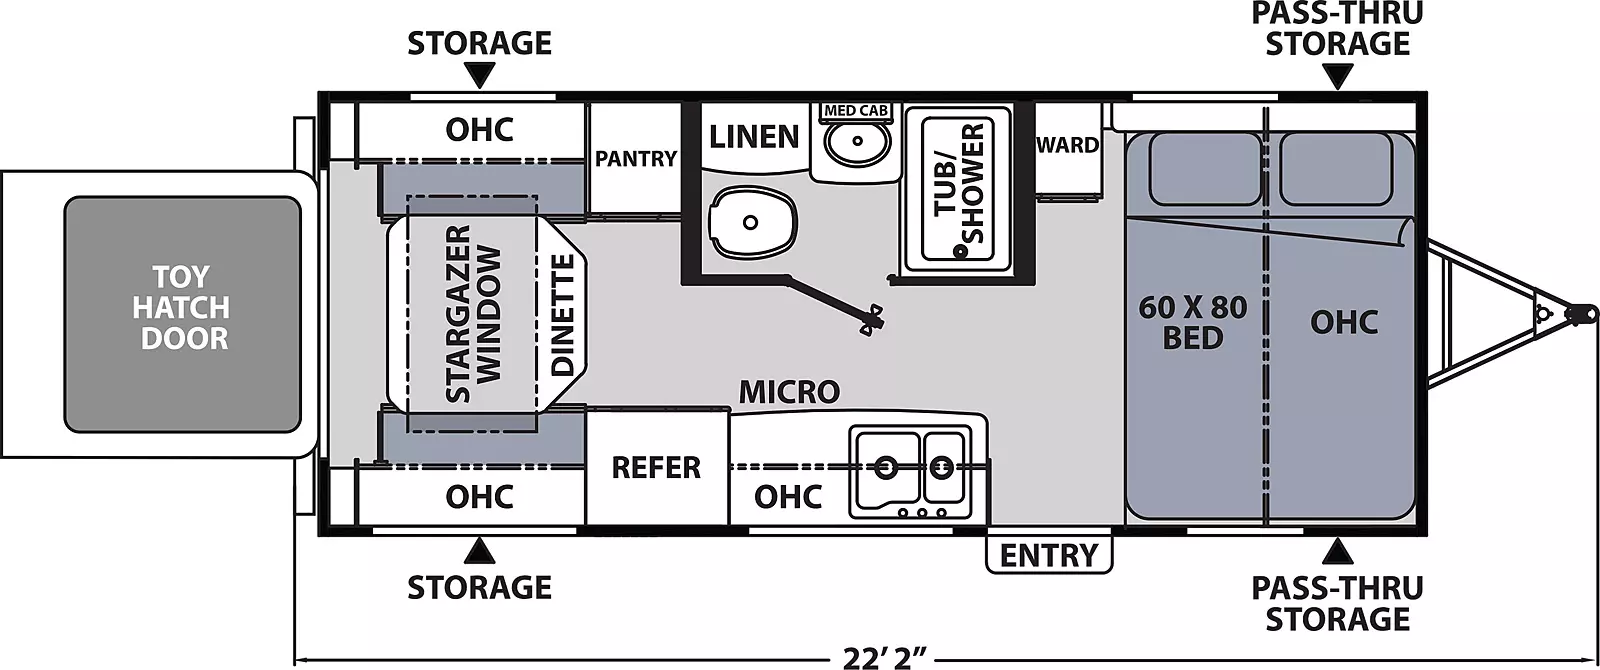 The 17TH is a toy hauler floorplan with no slide outs and one entry door on the door side. Interior layout from front to back: front bedroom with side-facing bed, overhead cabinet and wardrobe; door side kitchen with sink, overhead cabinet, microwave , and refrigerator; door side bathroom; rear dinette with stargazer window above, overhead cabinets, and pantry. Exterior storage towards the back and pass-thru storage at the front. Toy Hatch Door in the rear.  